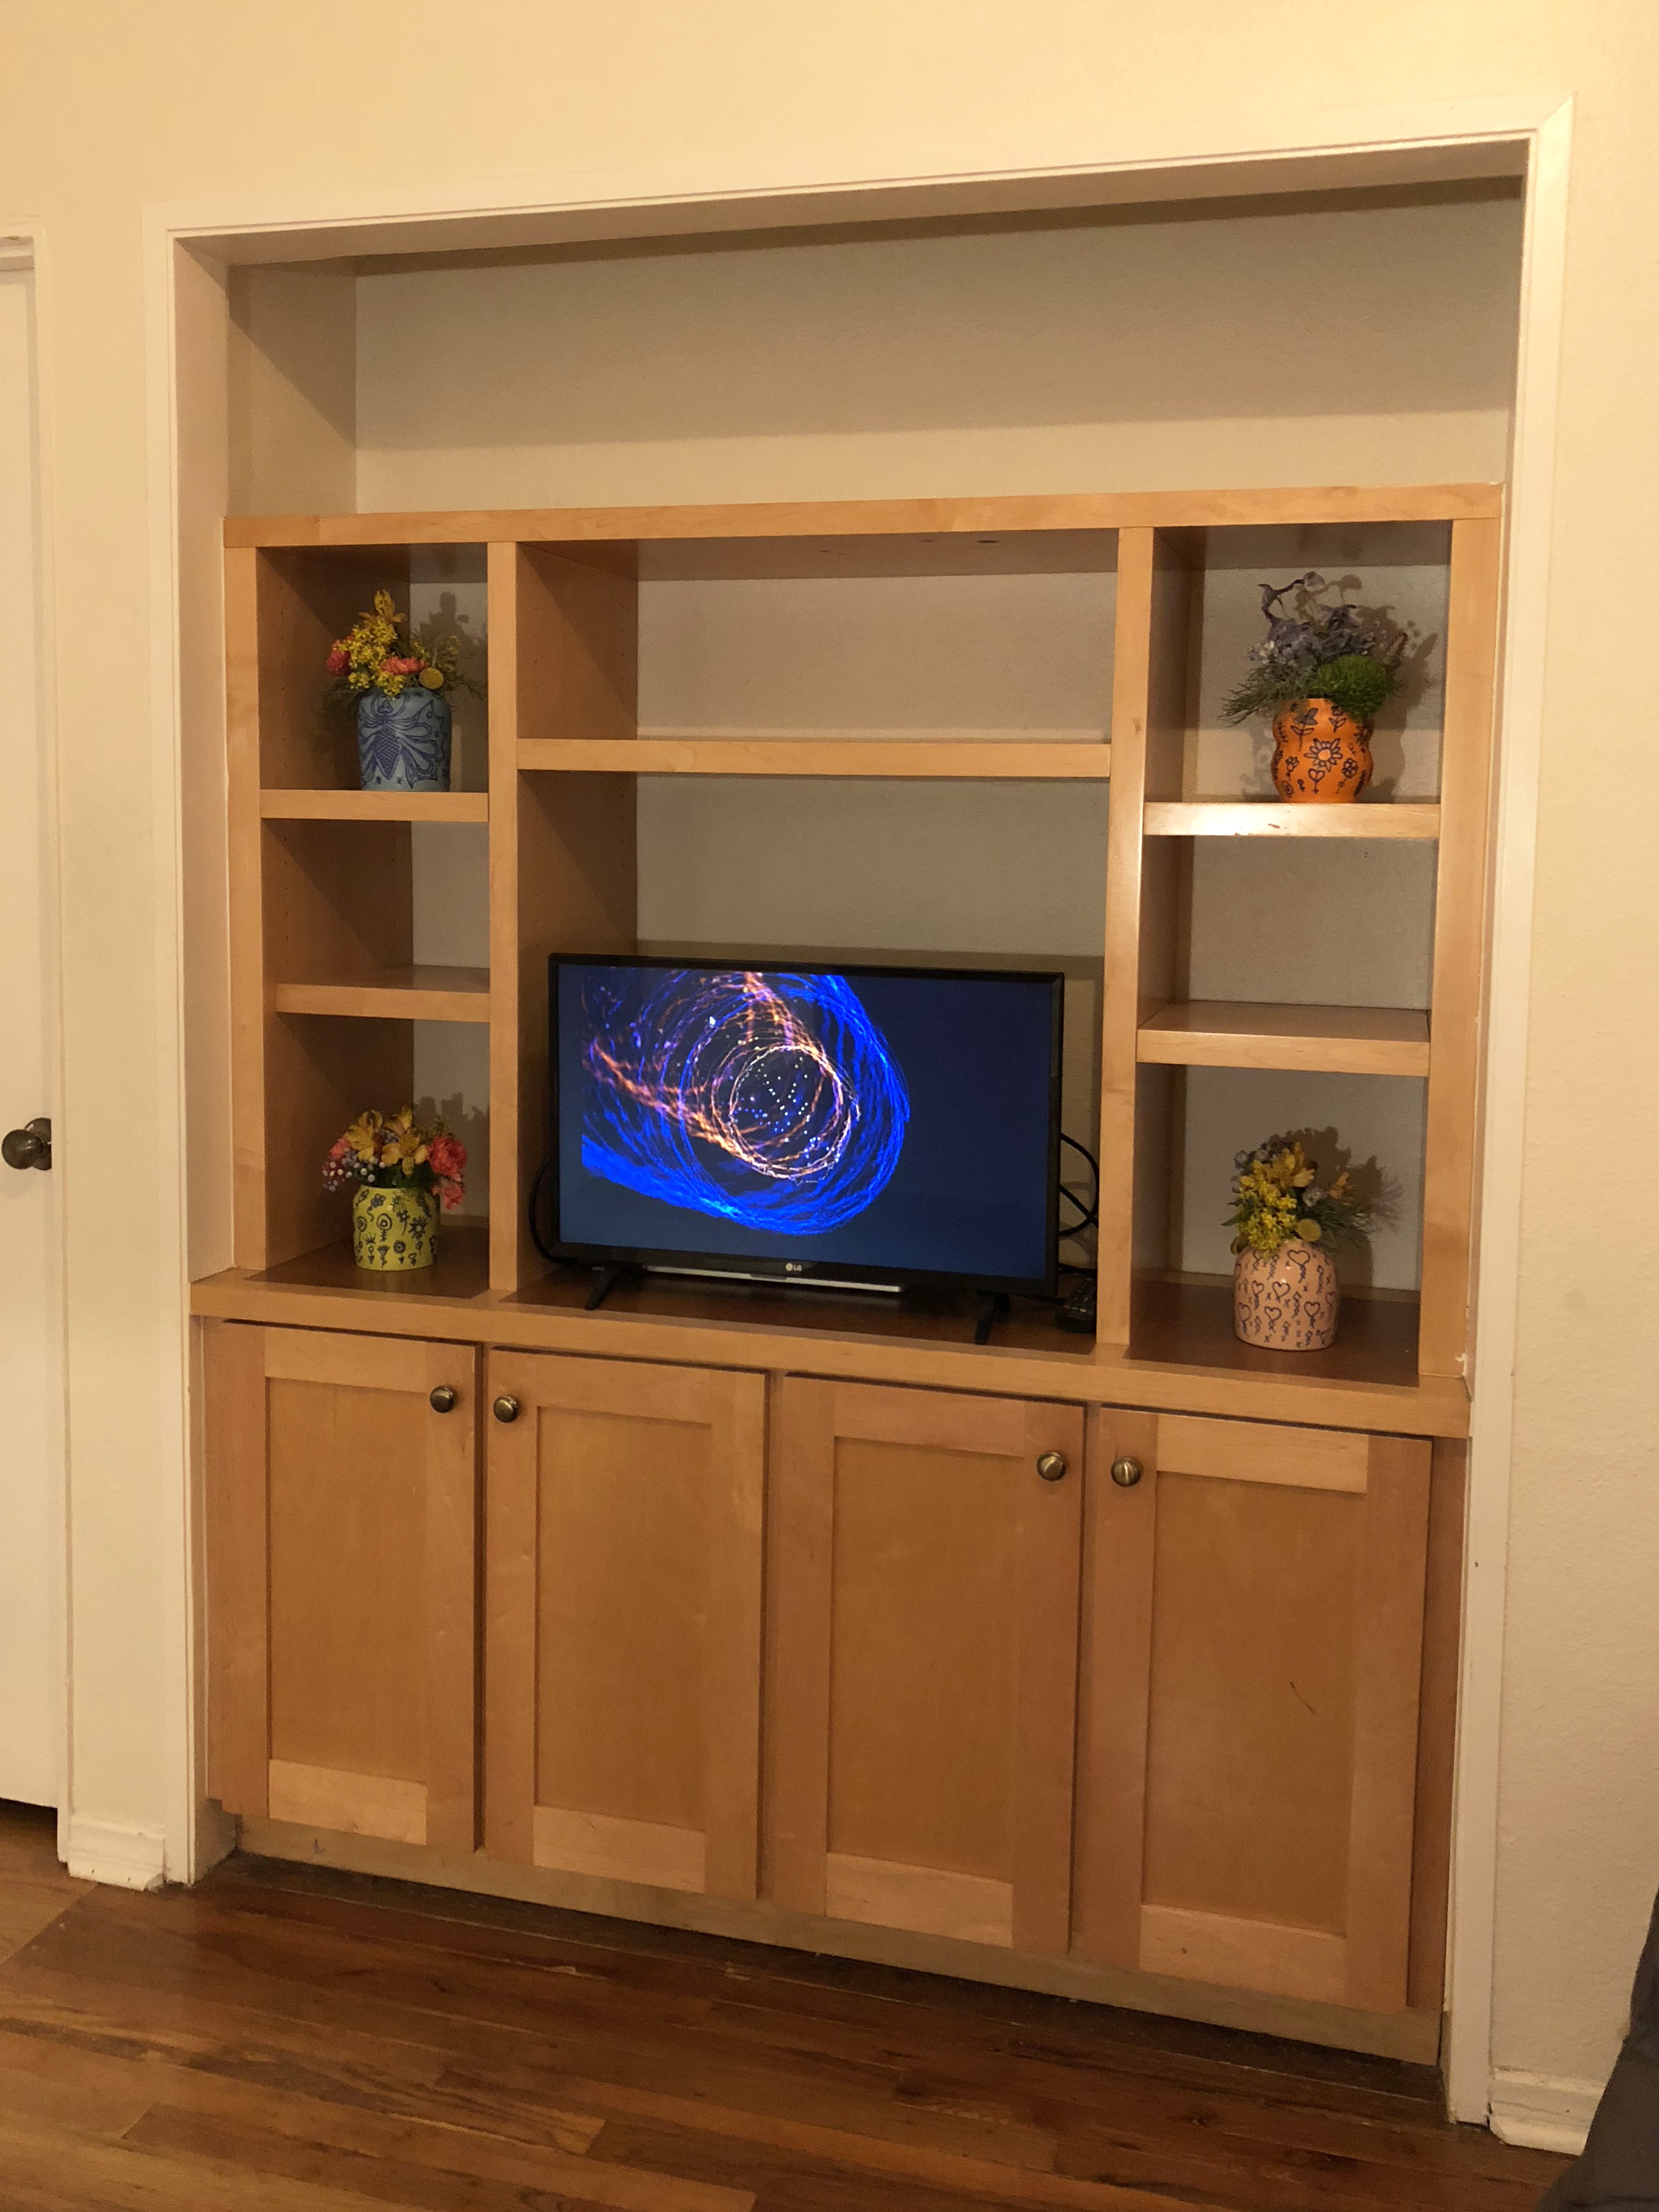 Entertainment console with a television in the center and four ceramic vases around it